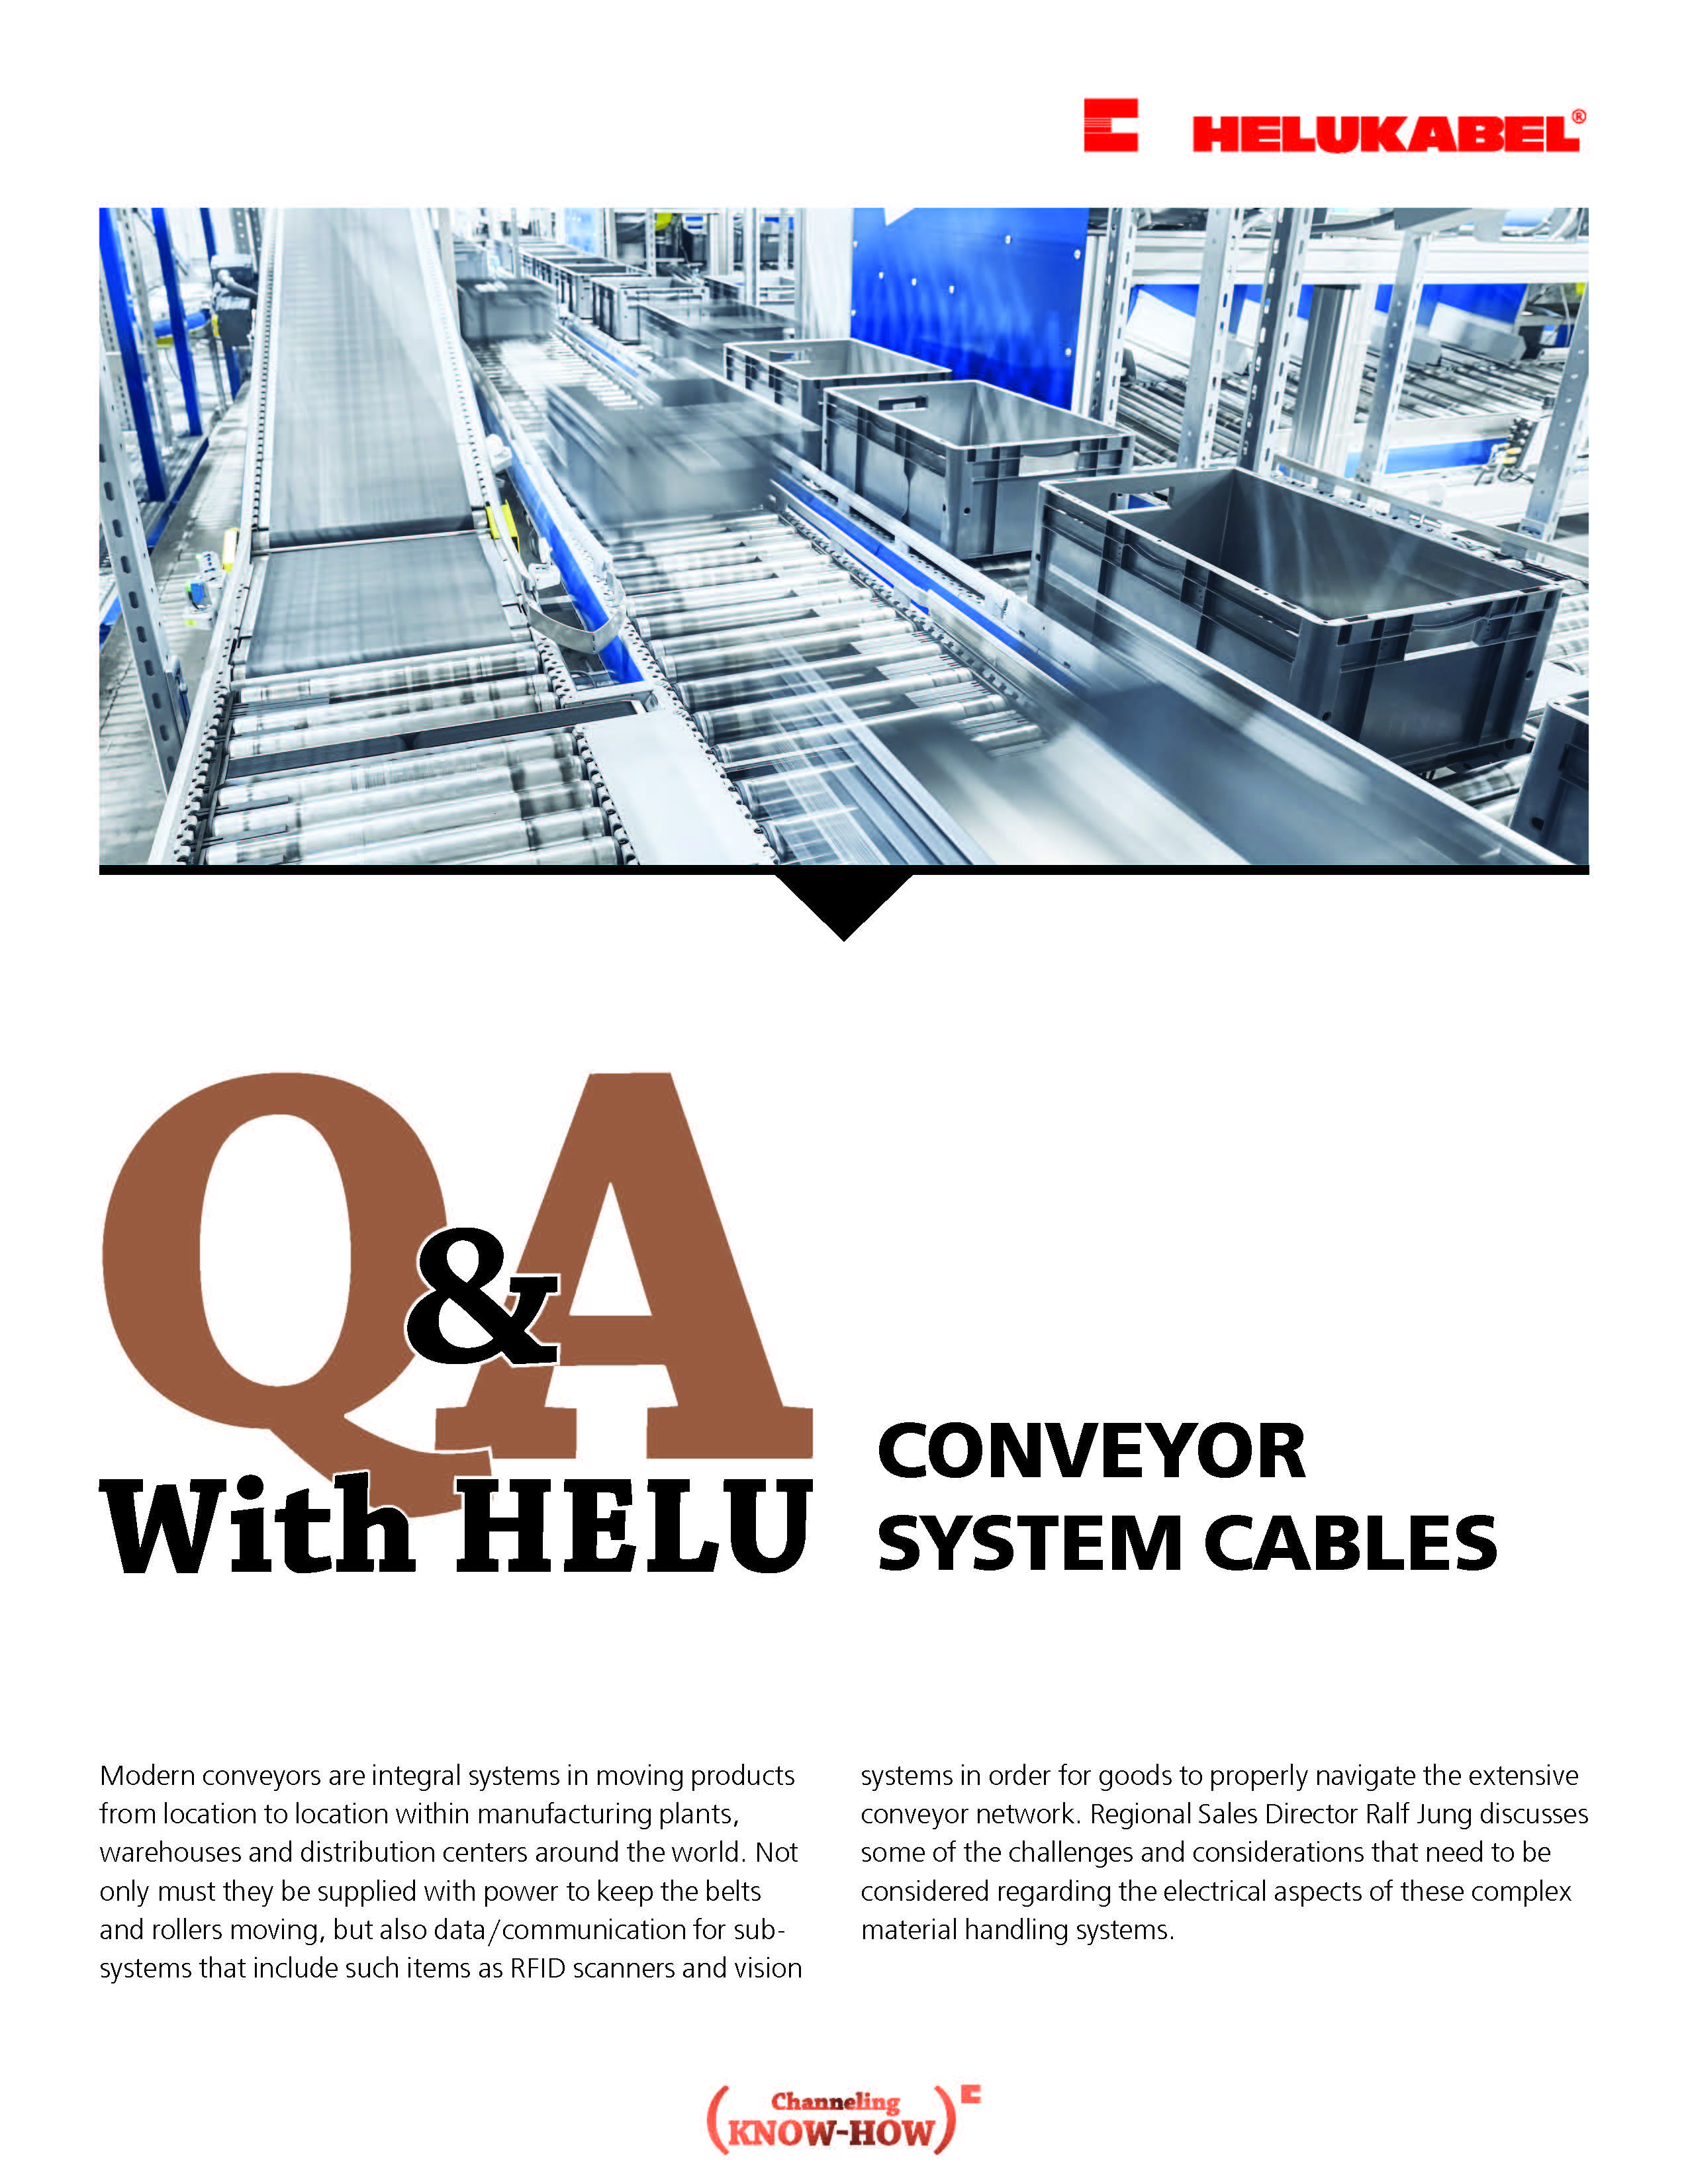 Q&A with HELU: Conveyor System Cables